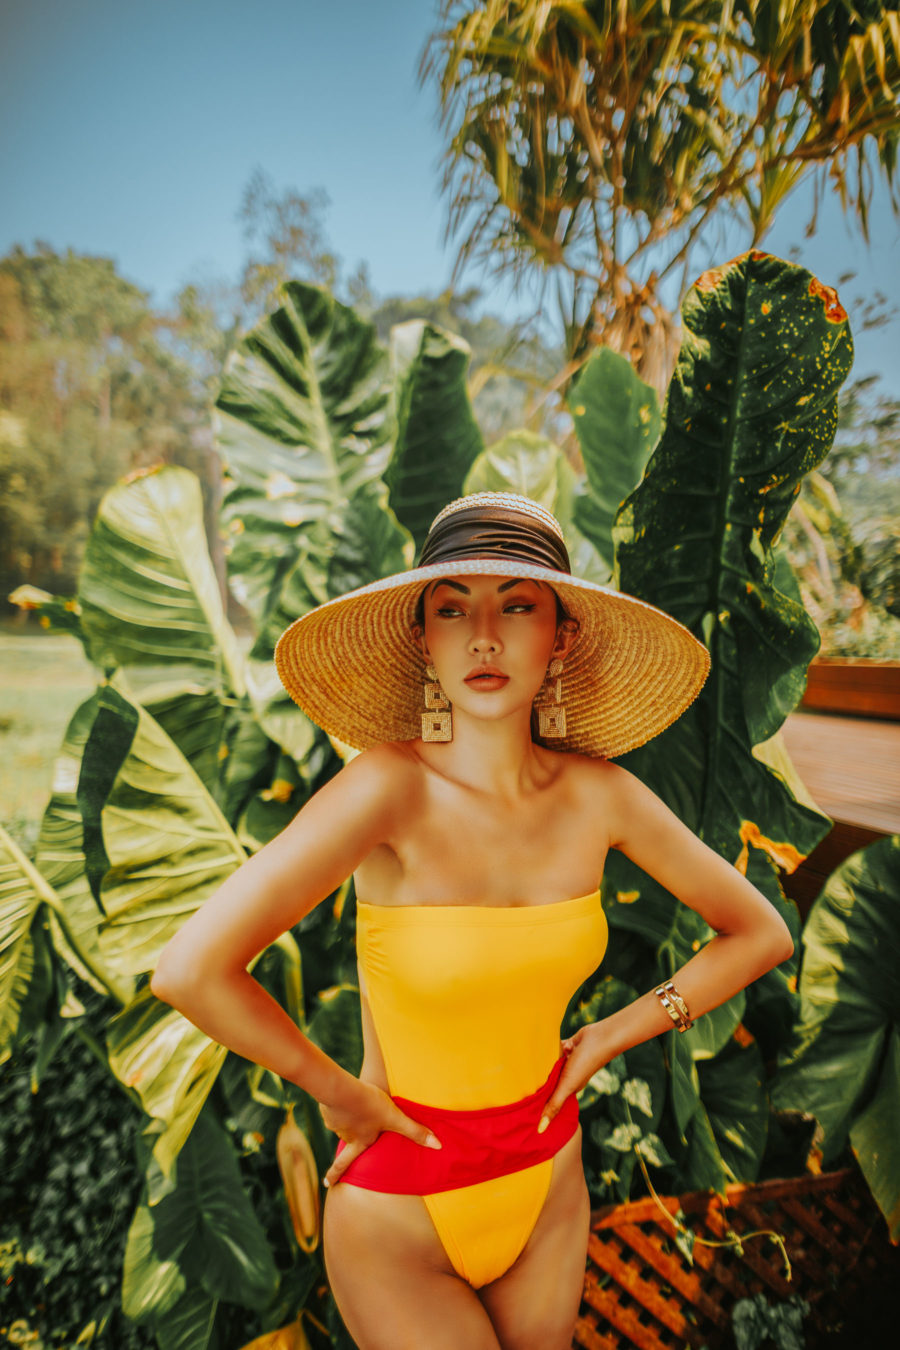 jessica wang wearing a one piece swimsuit and wide brim hat while sharing 2021 swim trends // Jessica Wang - Notjessfashion.com